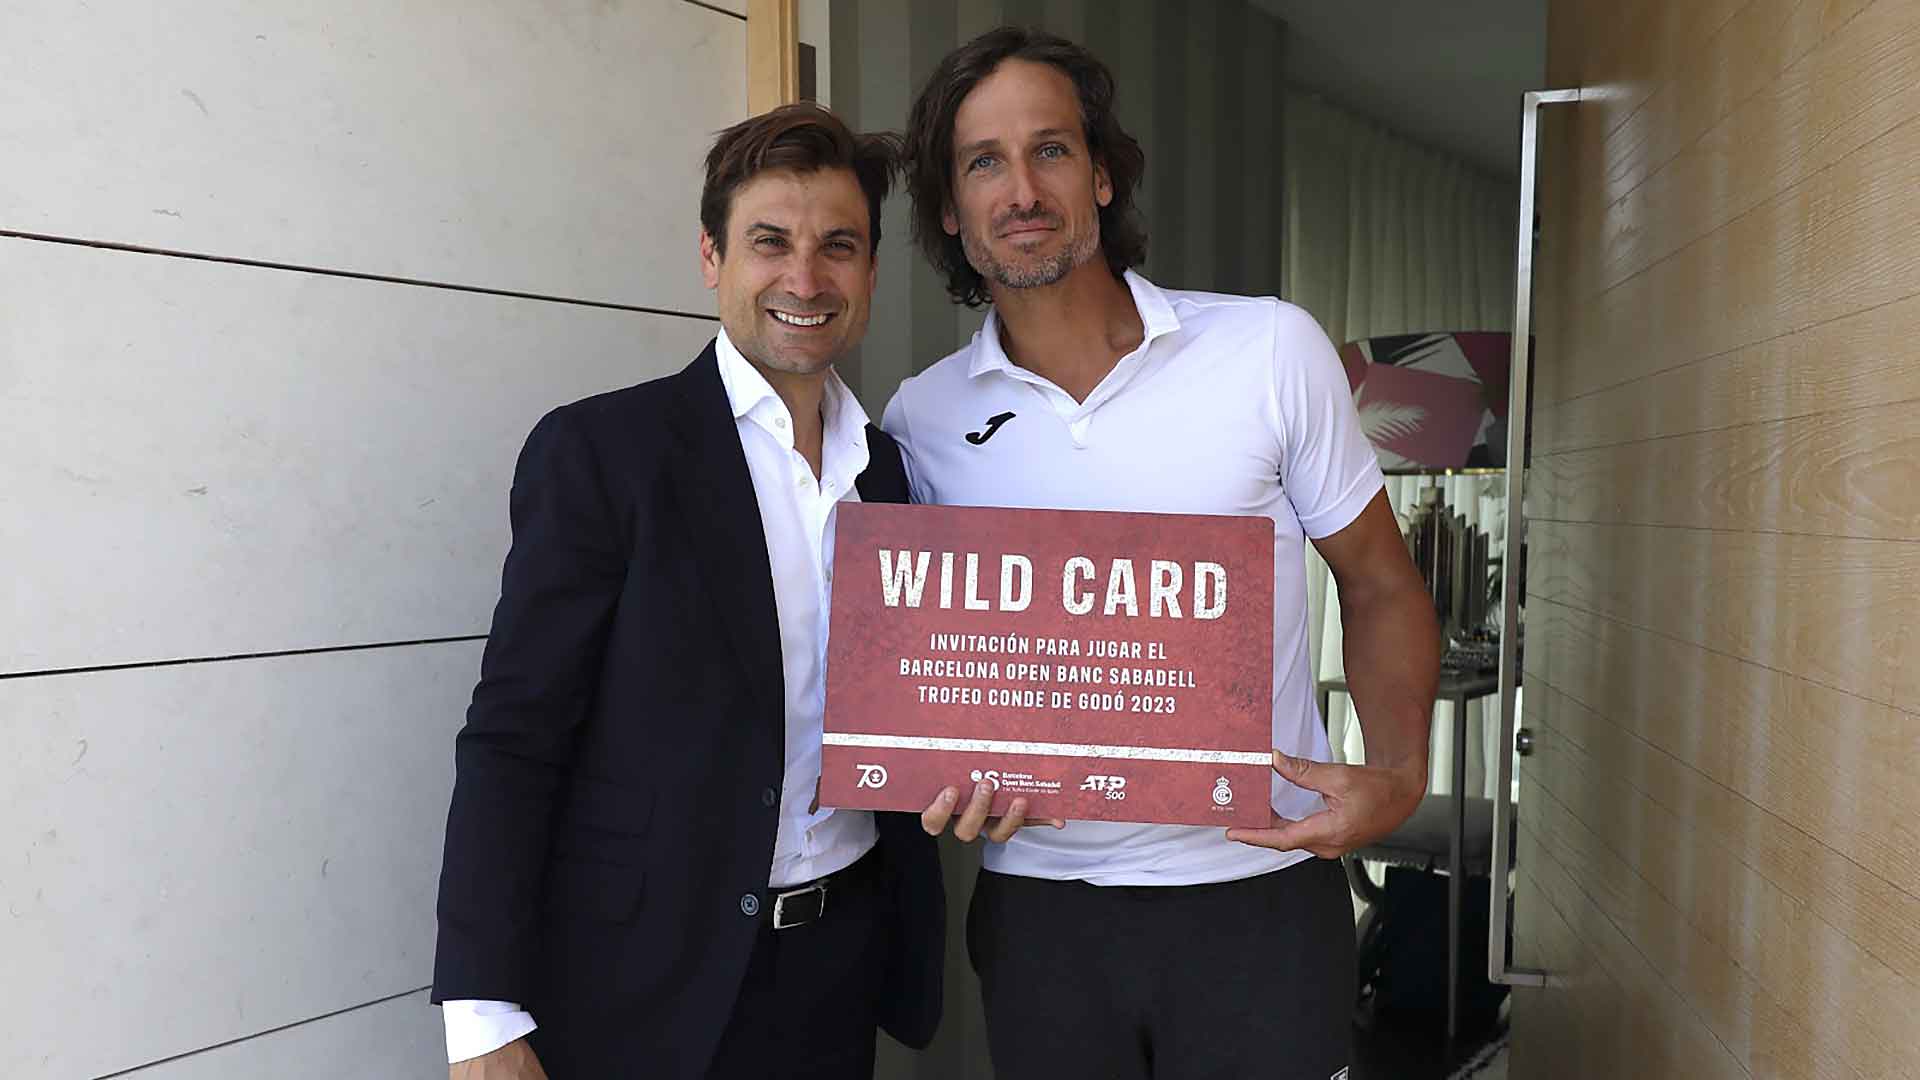 David Ferrer visits Feliciano Lopez's home to present him with a Barcelona wild card.